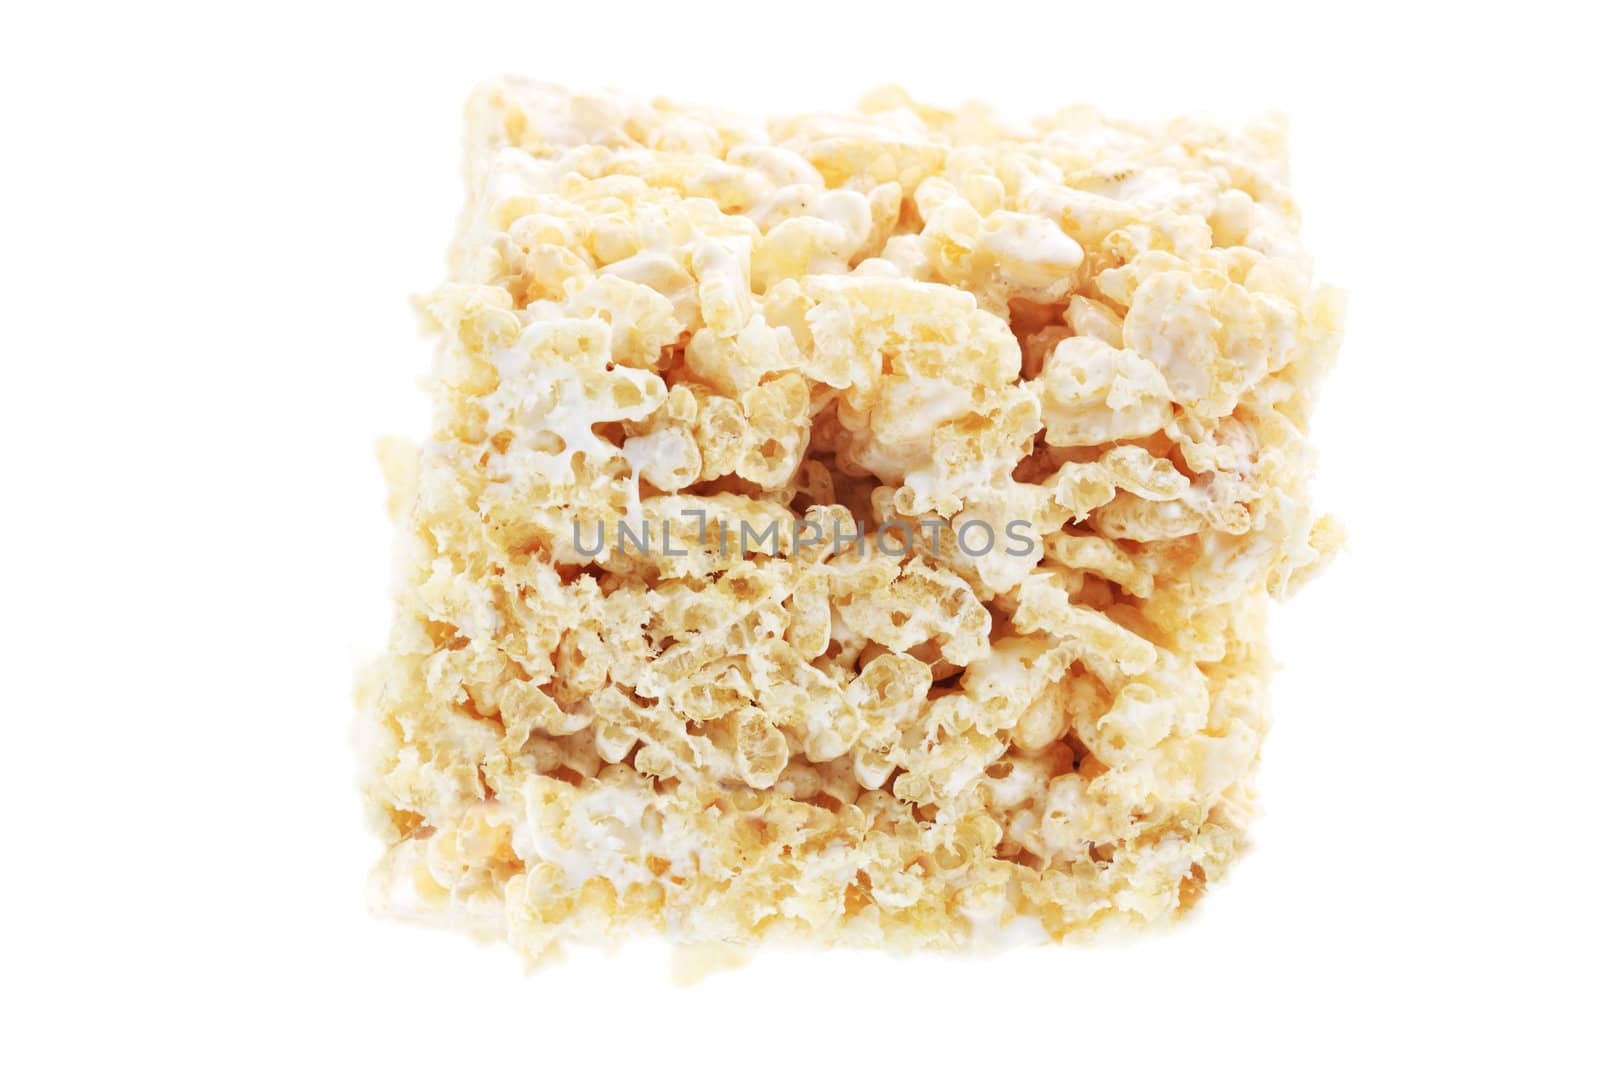 Marshmallow and Rice Cereal Bar by StephanieFrey